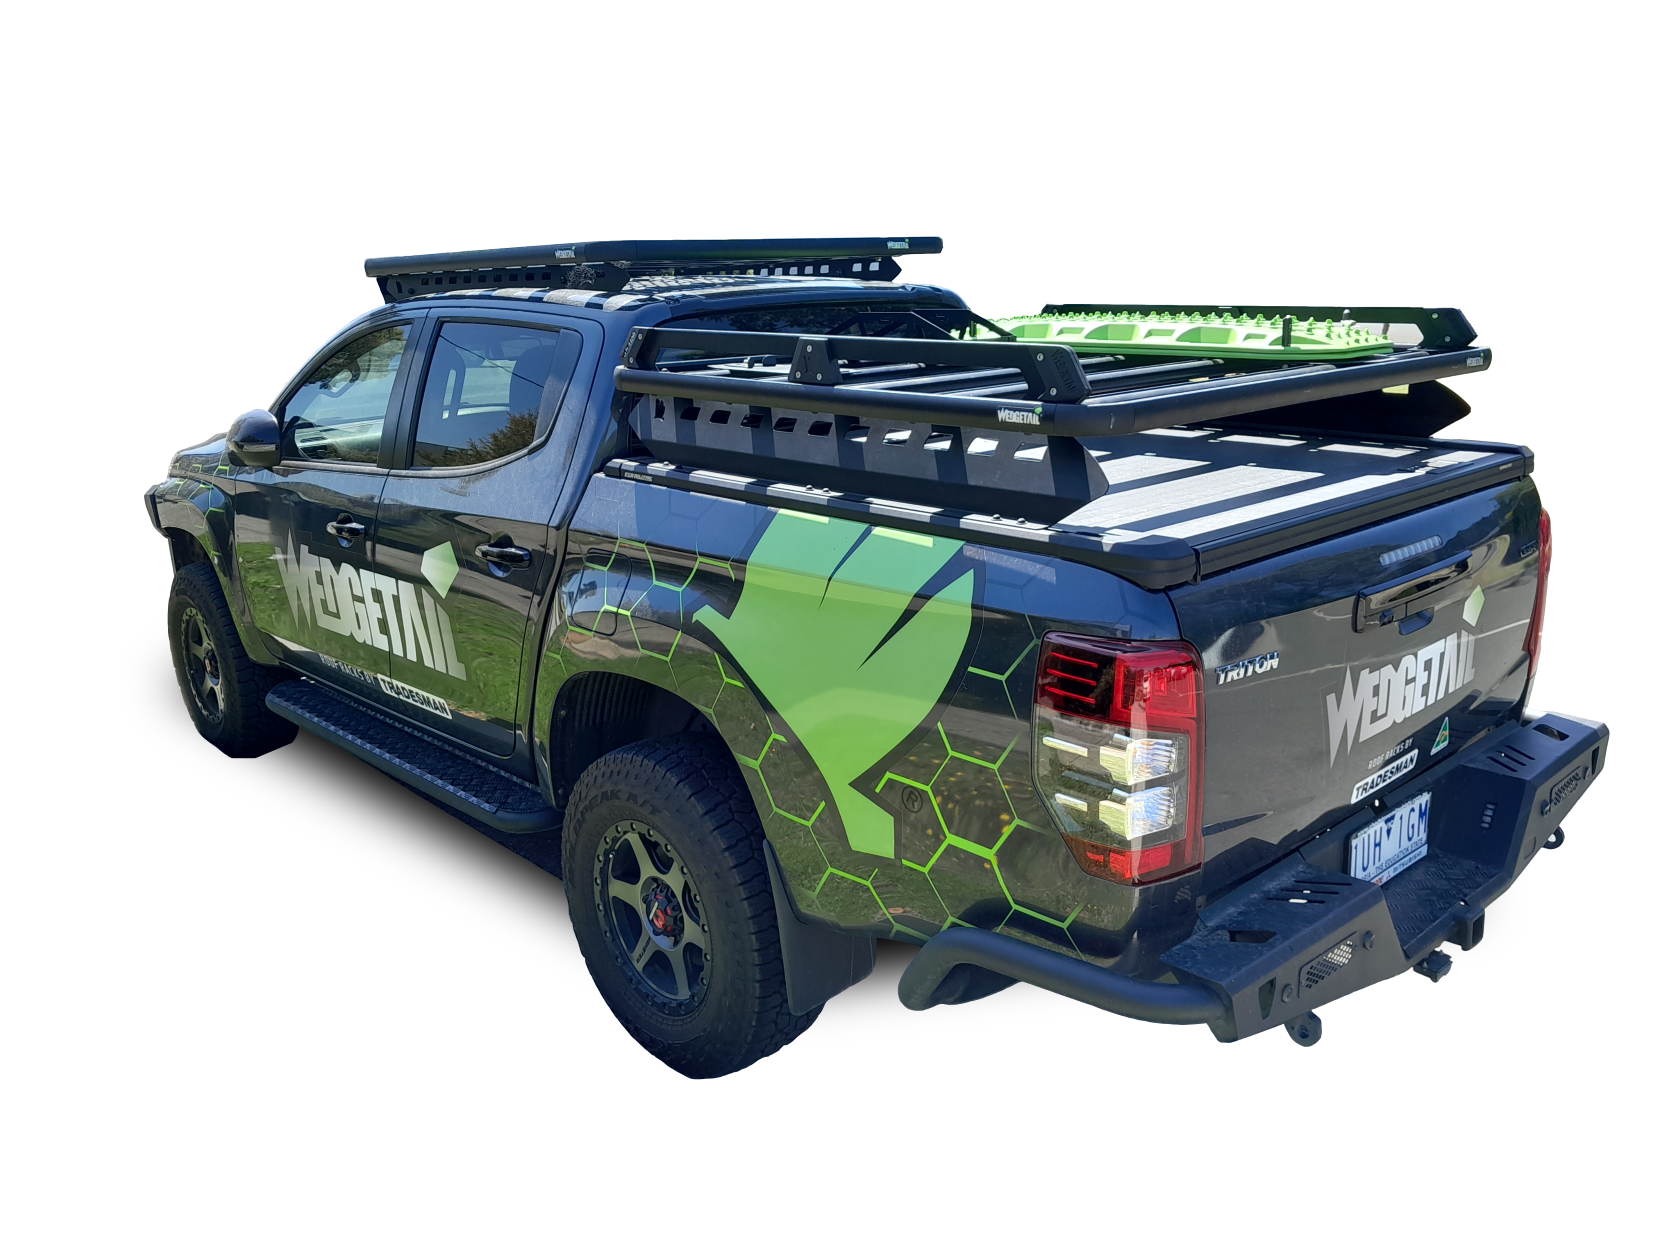 2020 Isuzu D-Max dual cab ute with a Wedgetail rack installed – hero image.